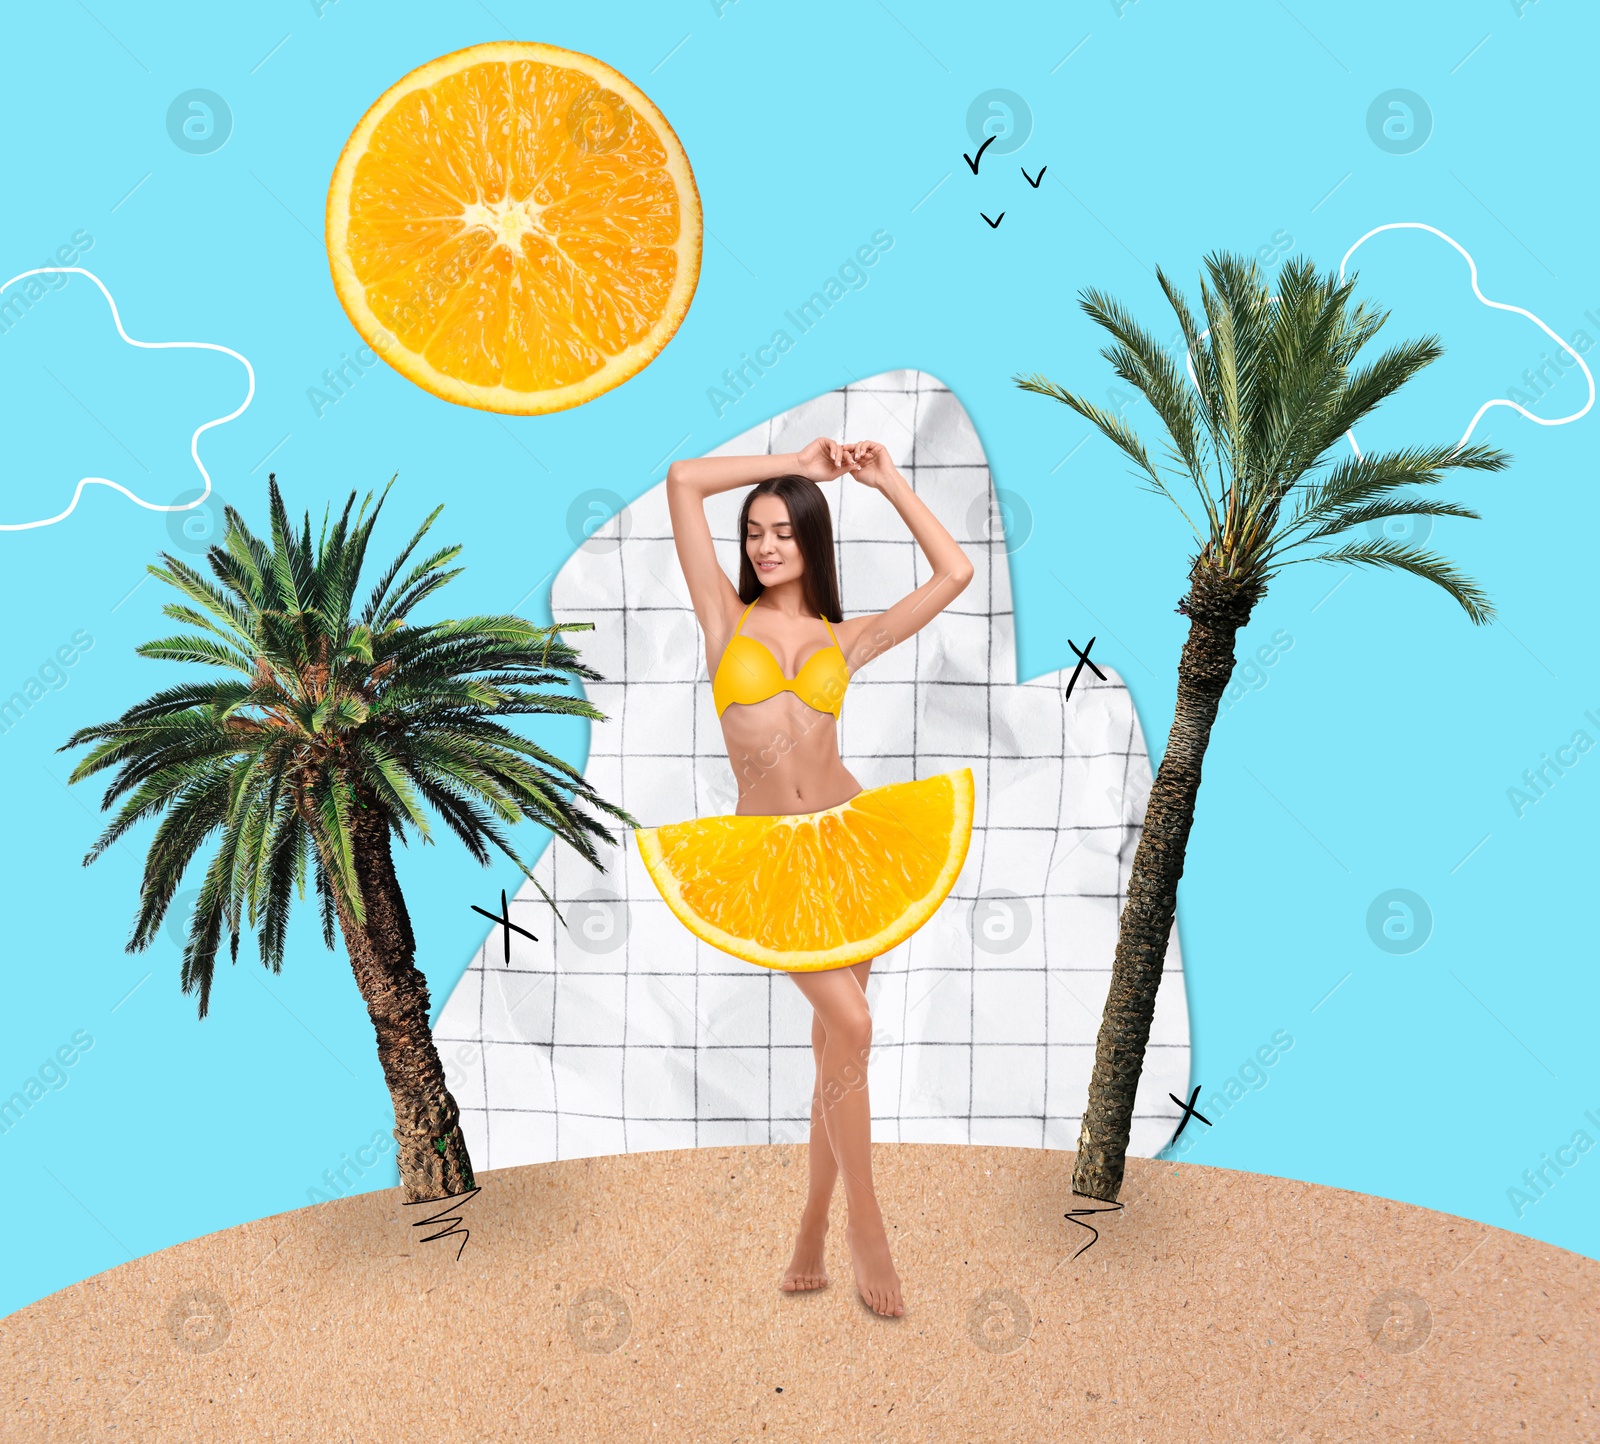 Image of Summer creative collage with attractive woman in bikini, tropical palms and orange